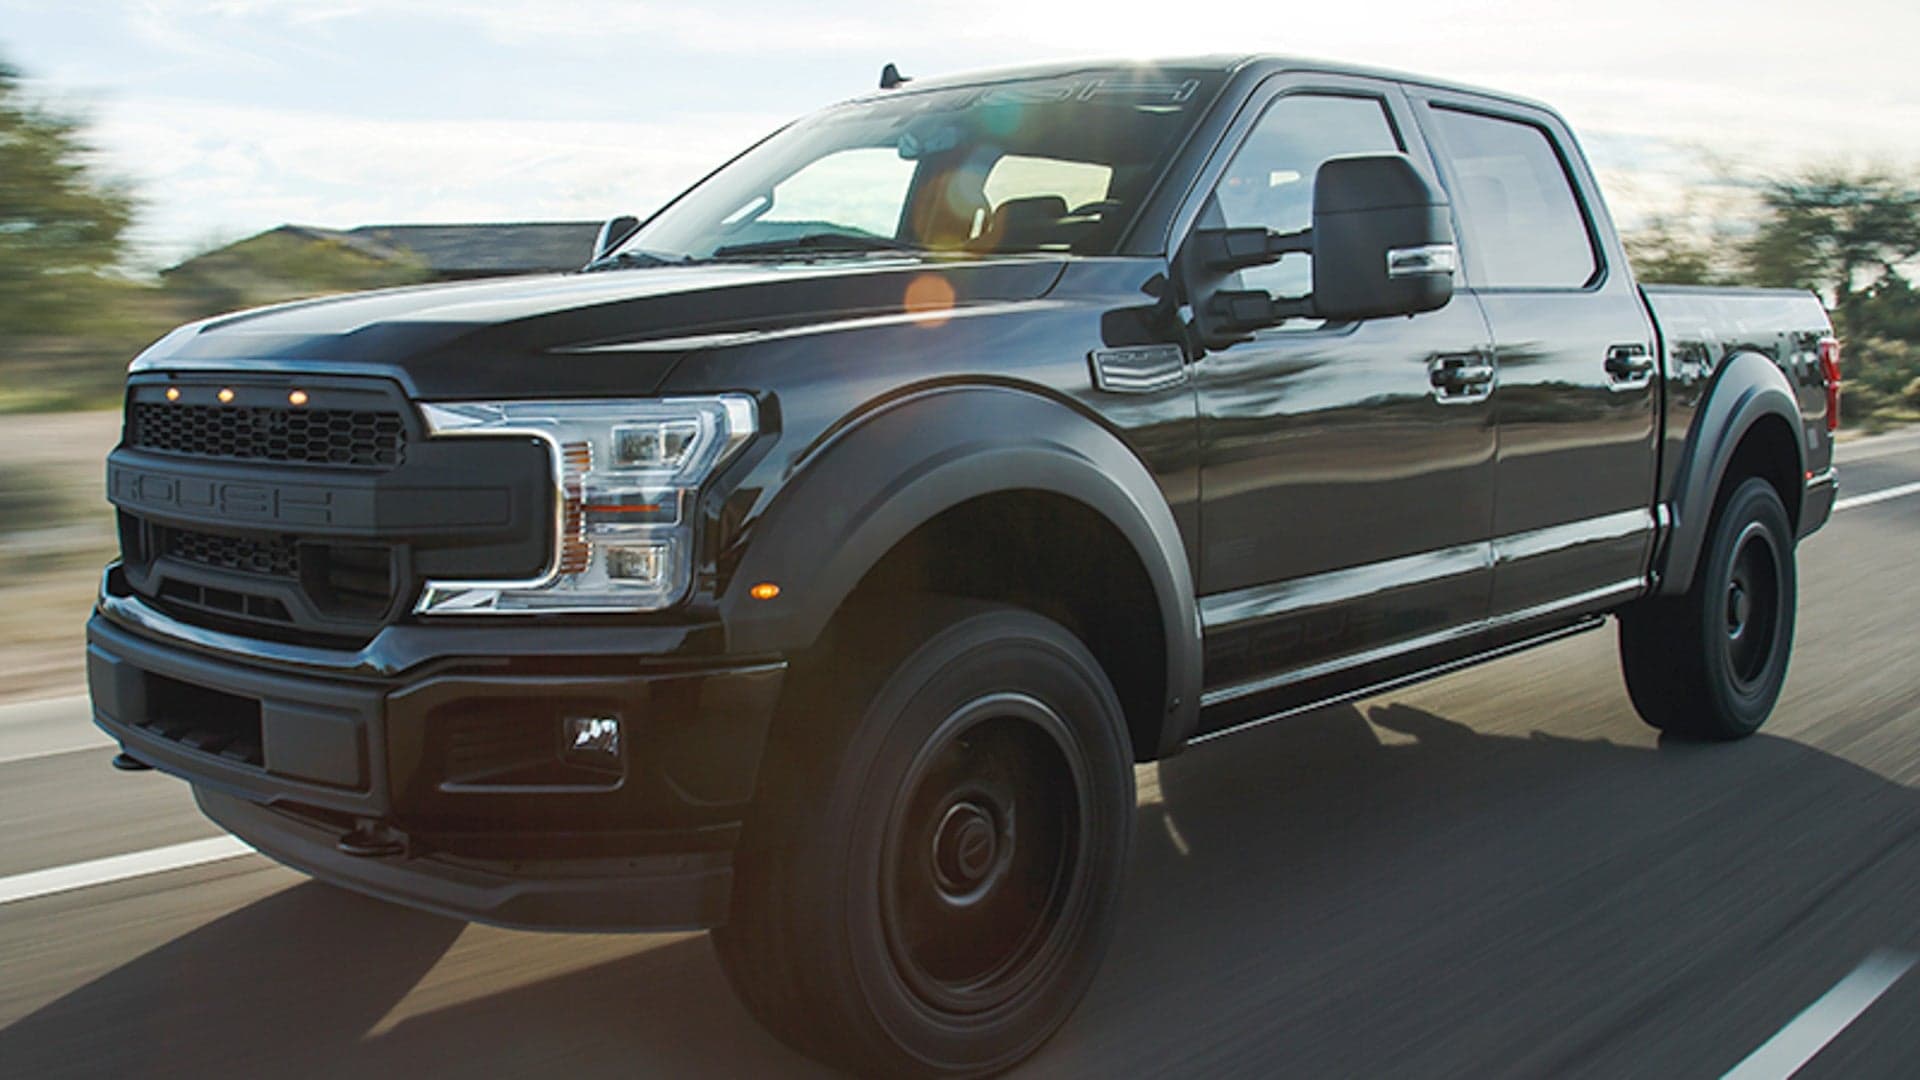 2020 Roush F-150 5.11 Tactical Edition Includes 650-HP Supercharged V8 and a ‘Tactical Pen’